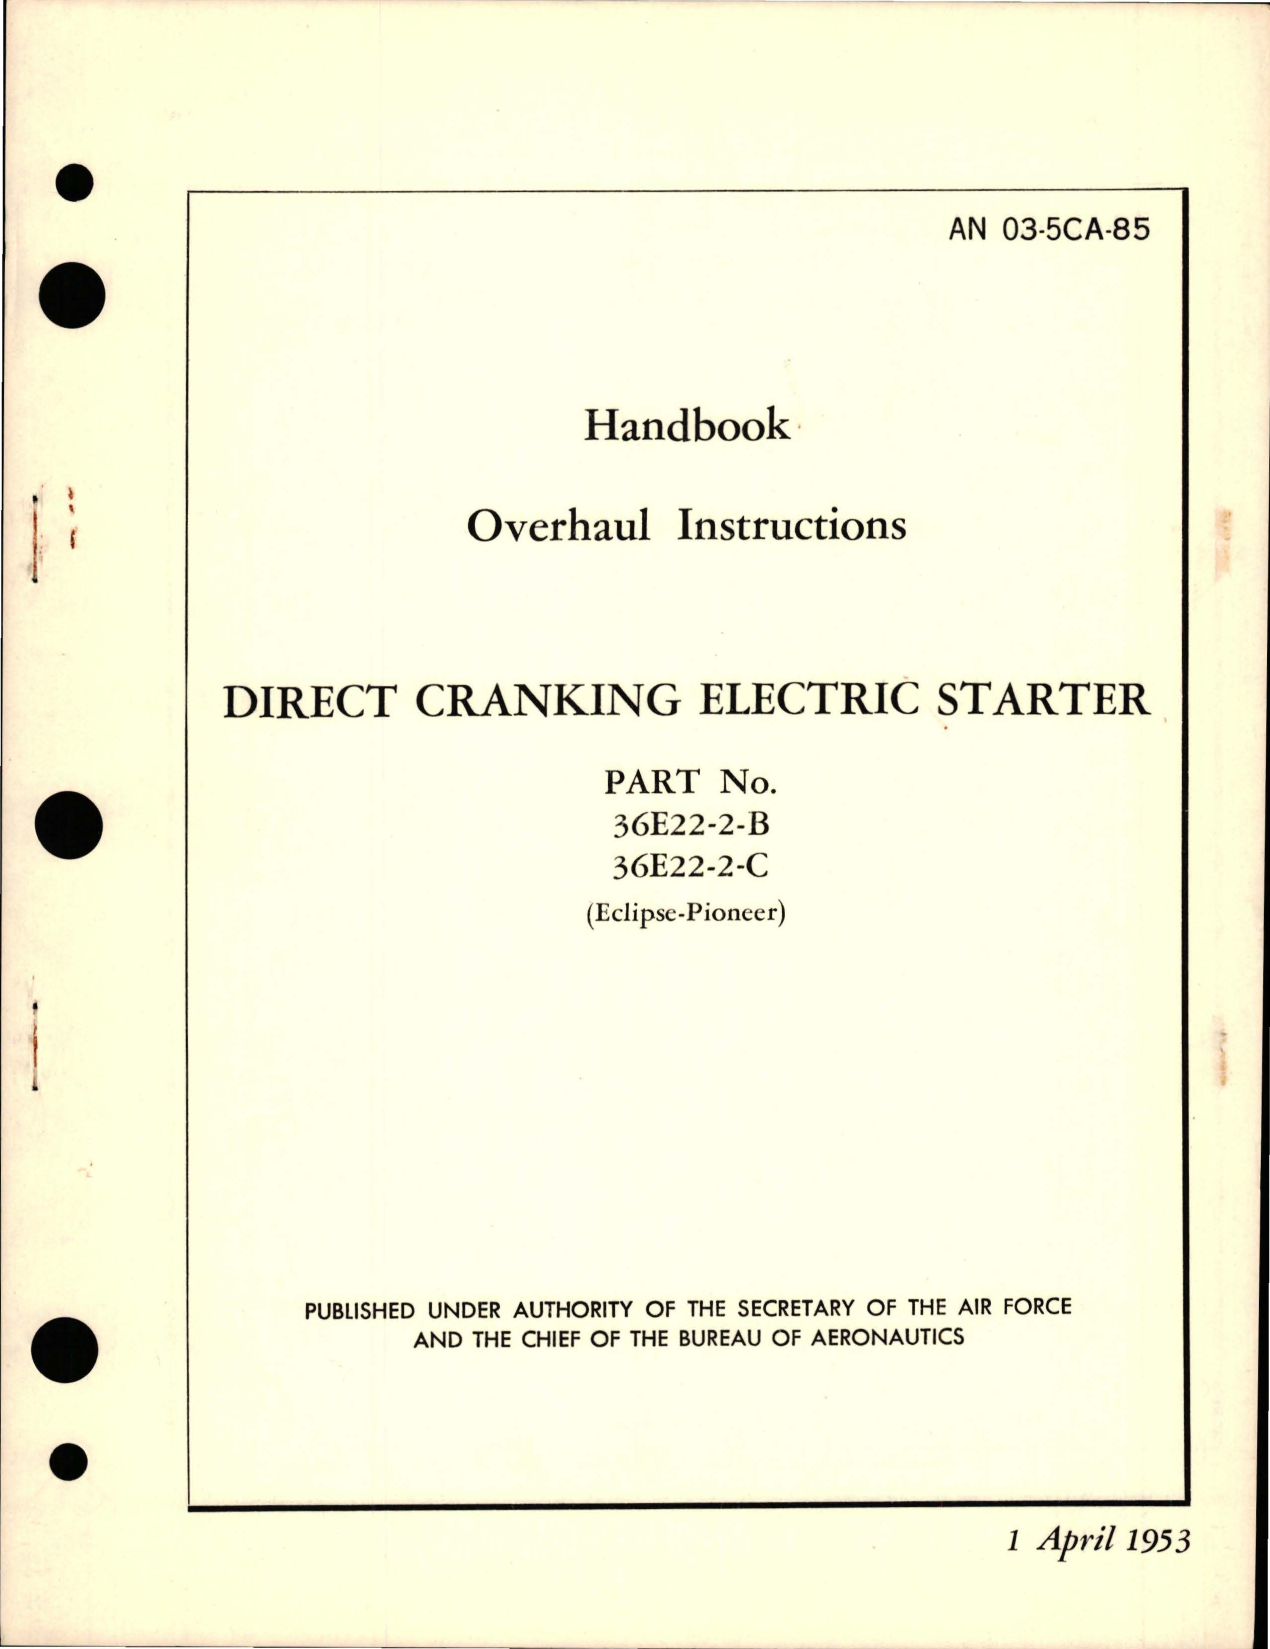 Sample page 1 from AirCorps Library document: Overhaul Instructions for Direct Cranking Electric Starter - Parts 36E22-2-B and 36E22-2-C 